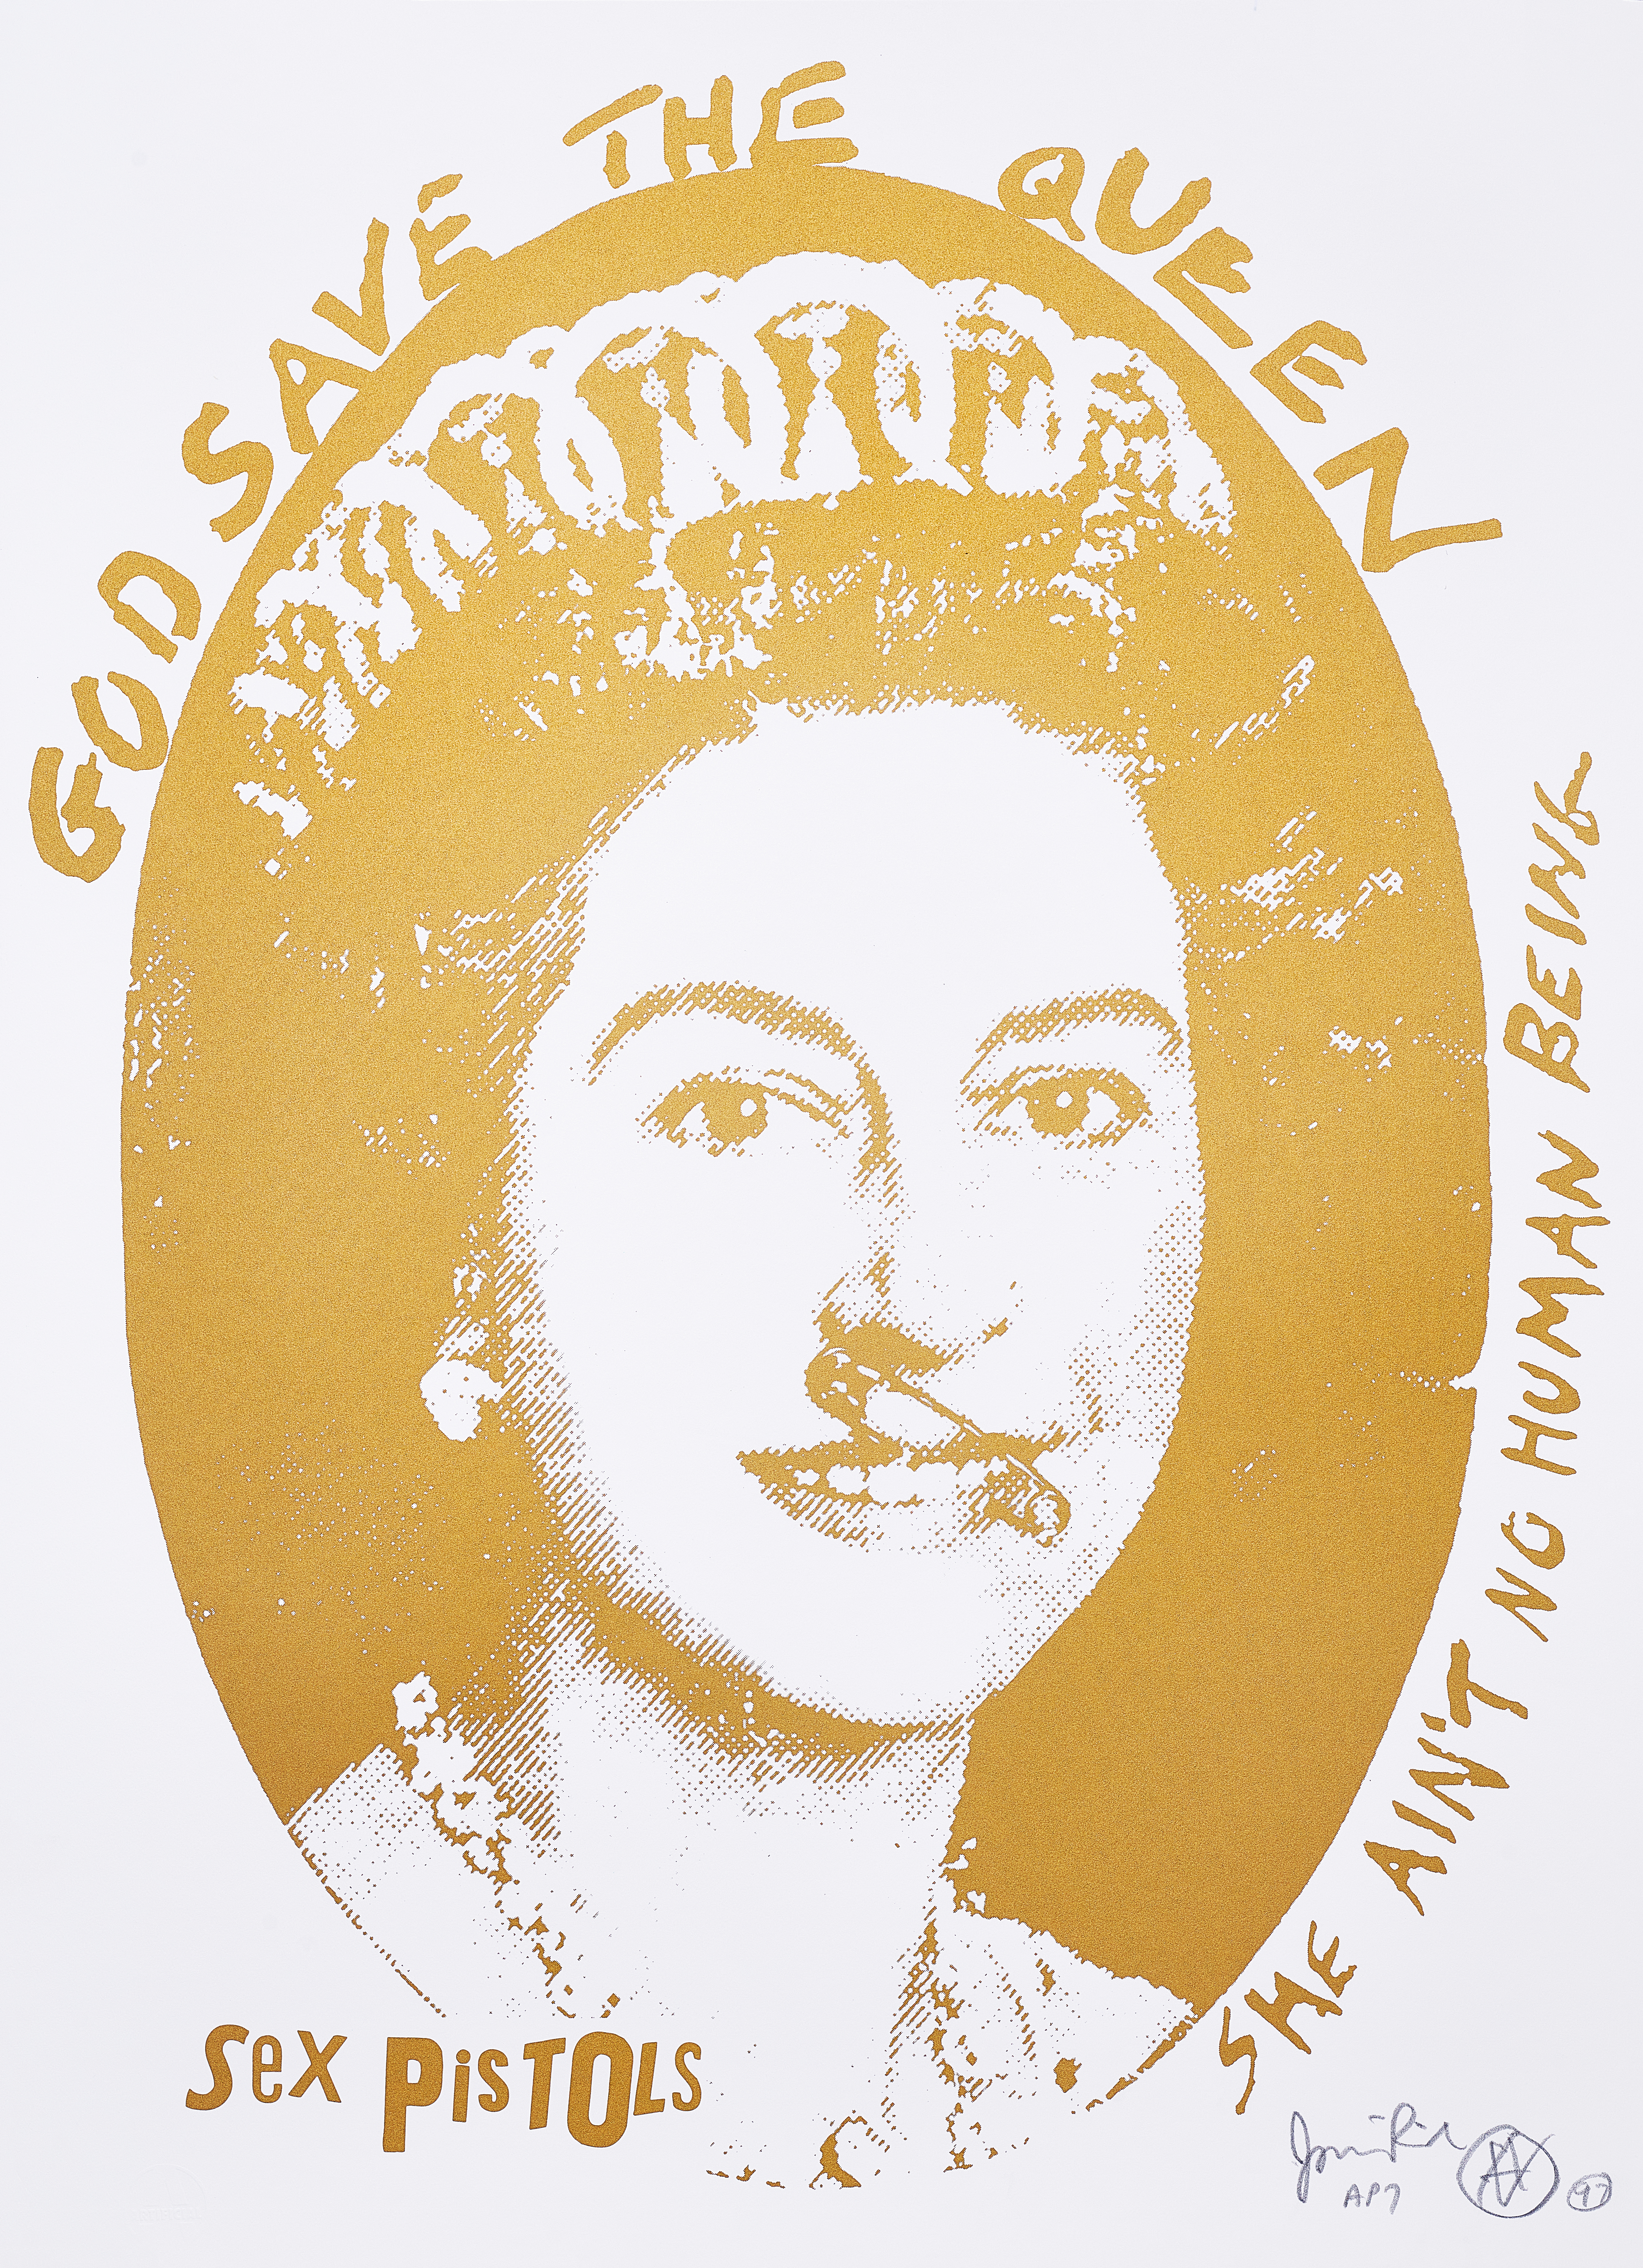 God Save The Queen (Gold on white)(1997)